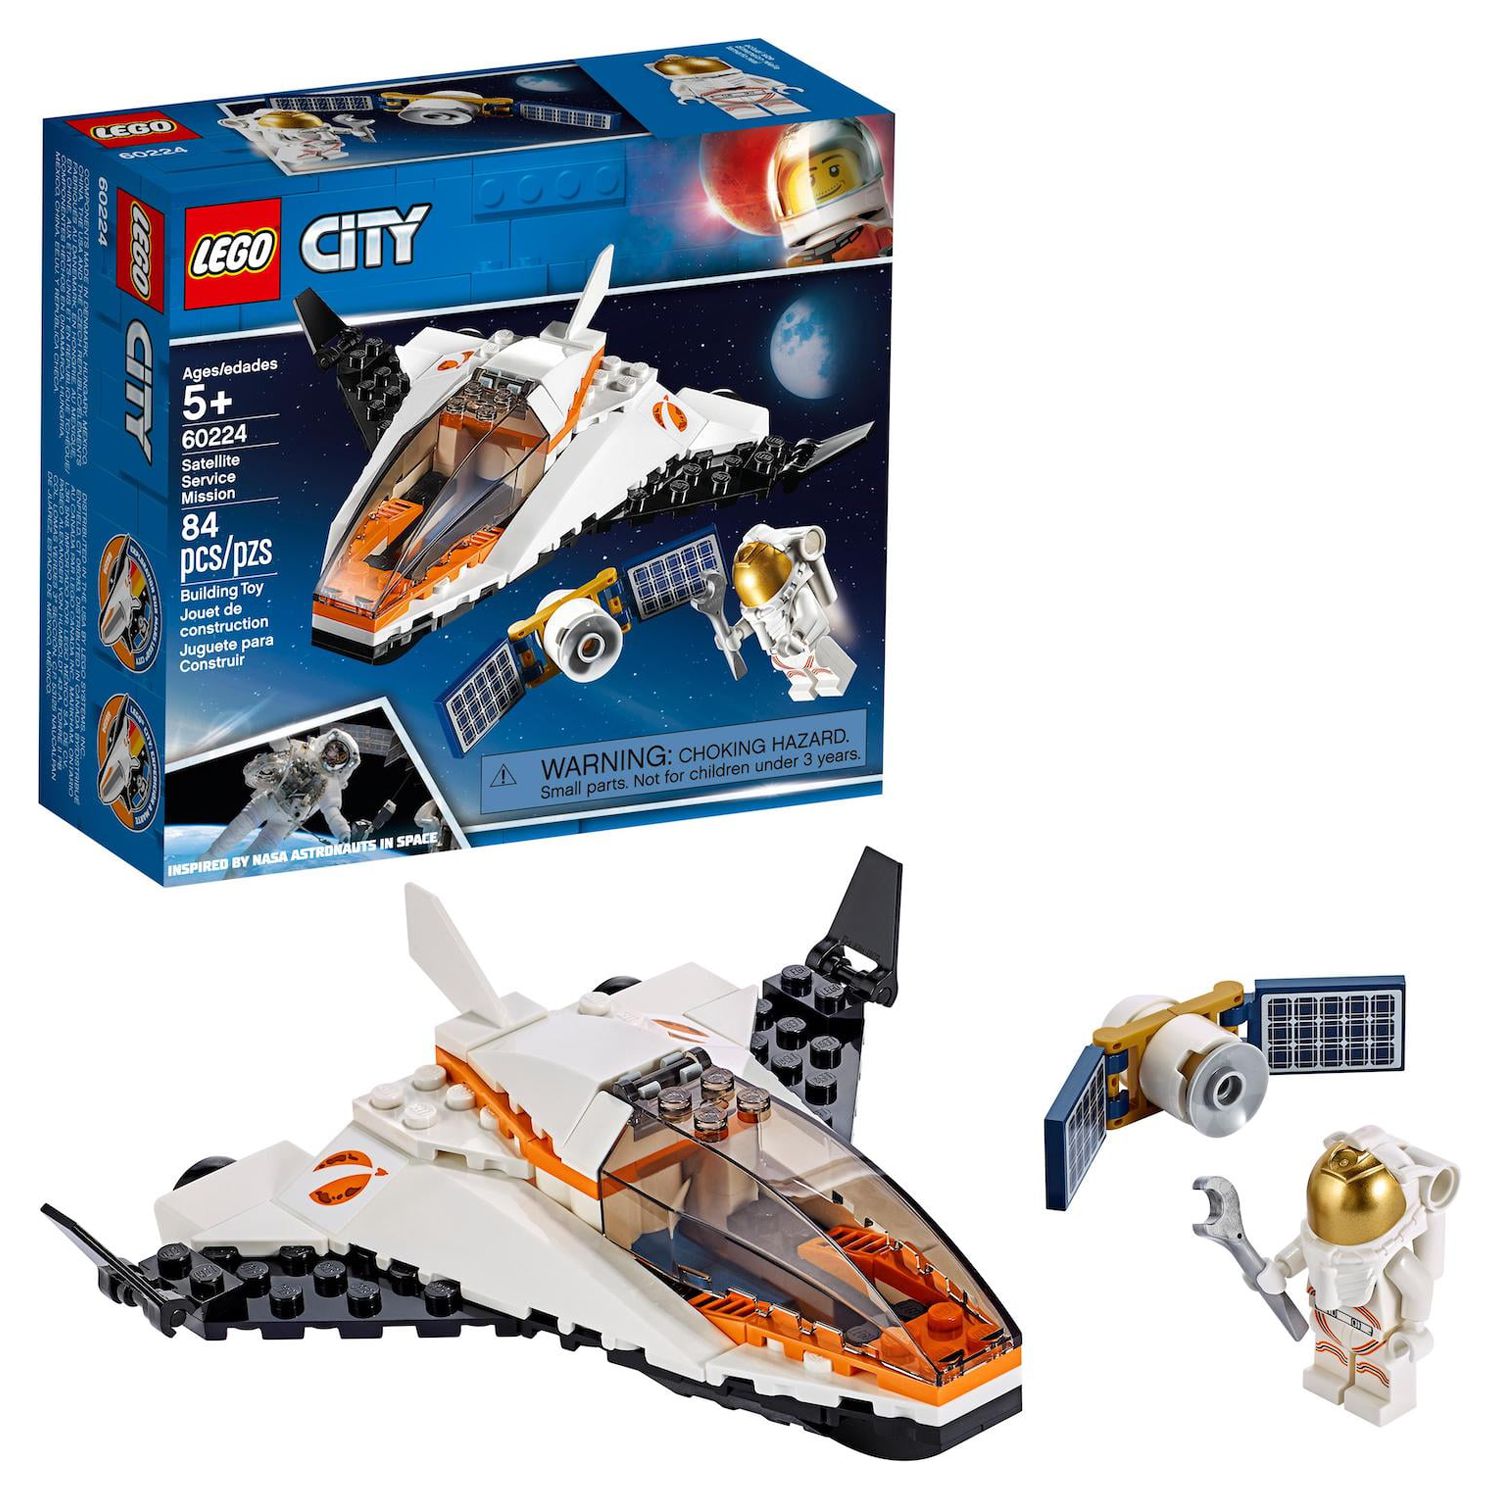 LEGO City Space Satellite Service Mission 60224 Space Shuttle Toy (84 Pieces) - image 1 of 8